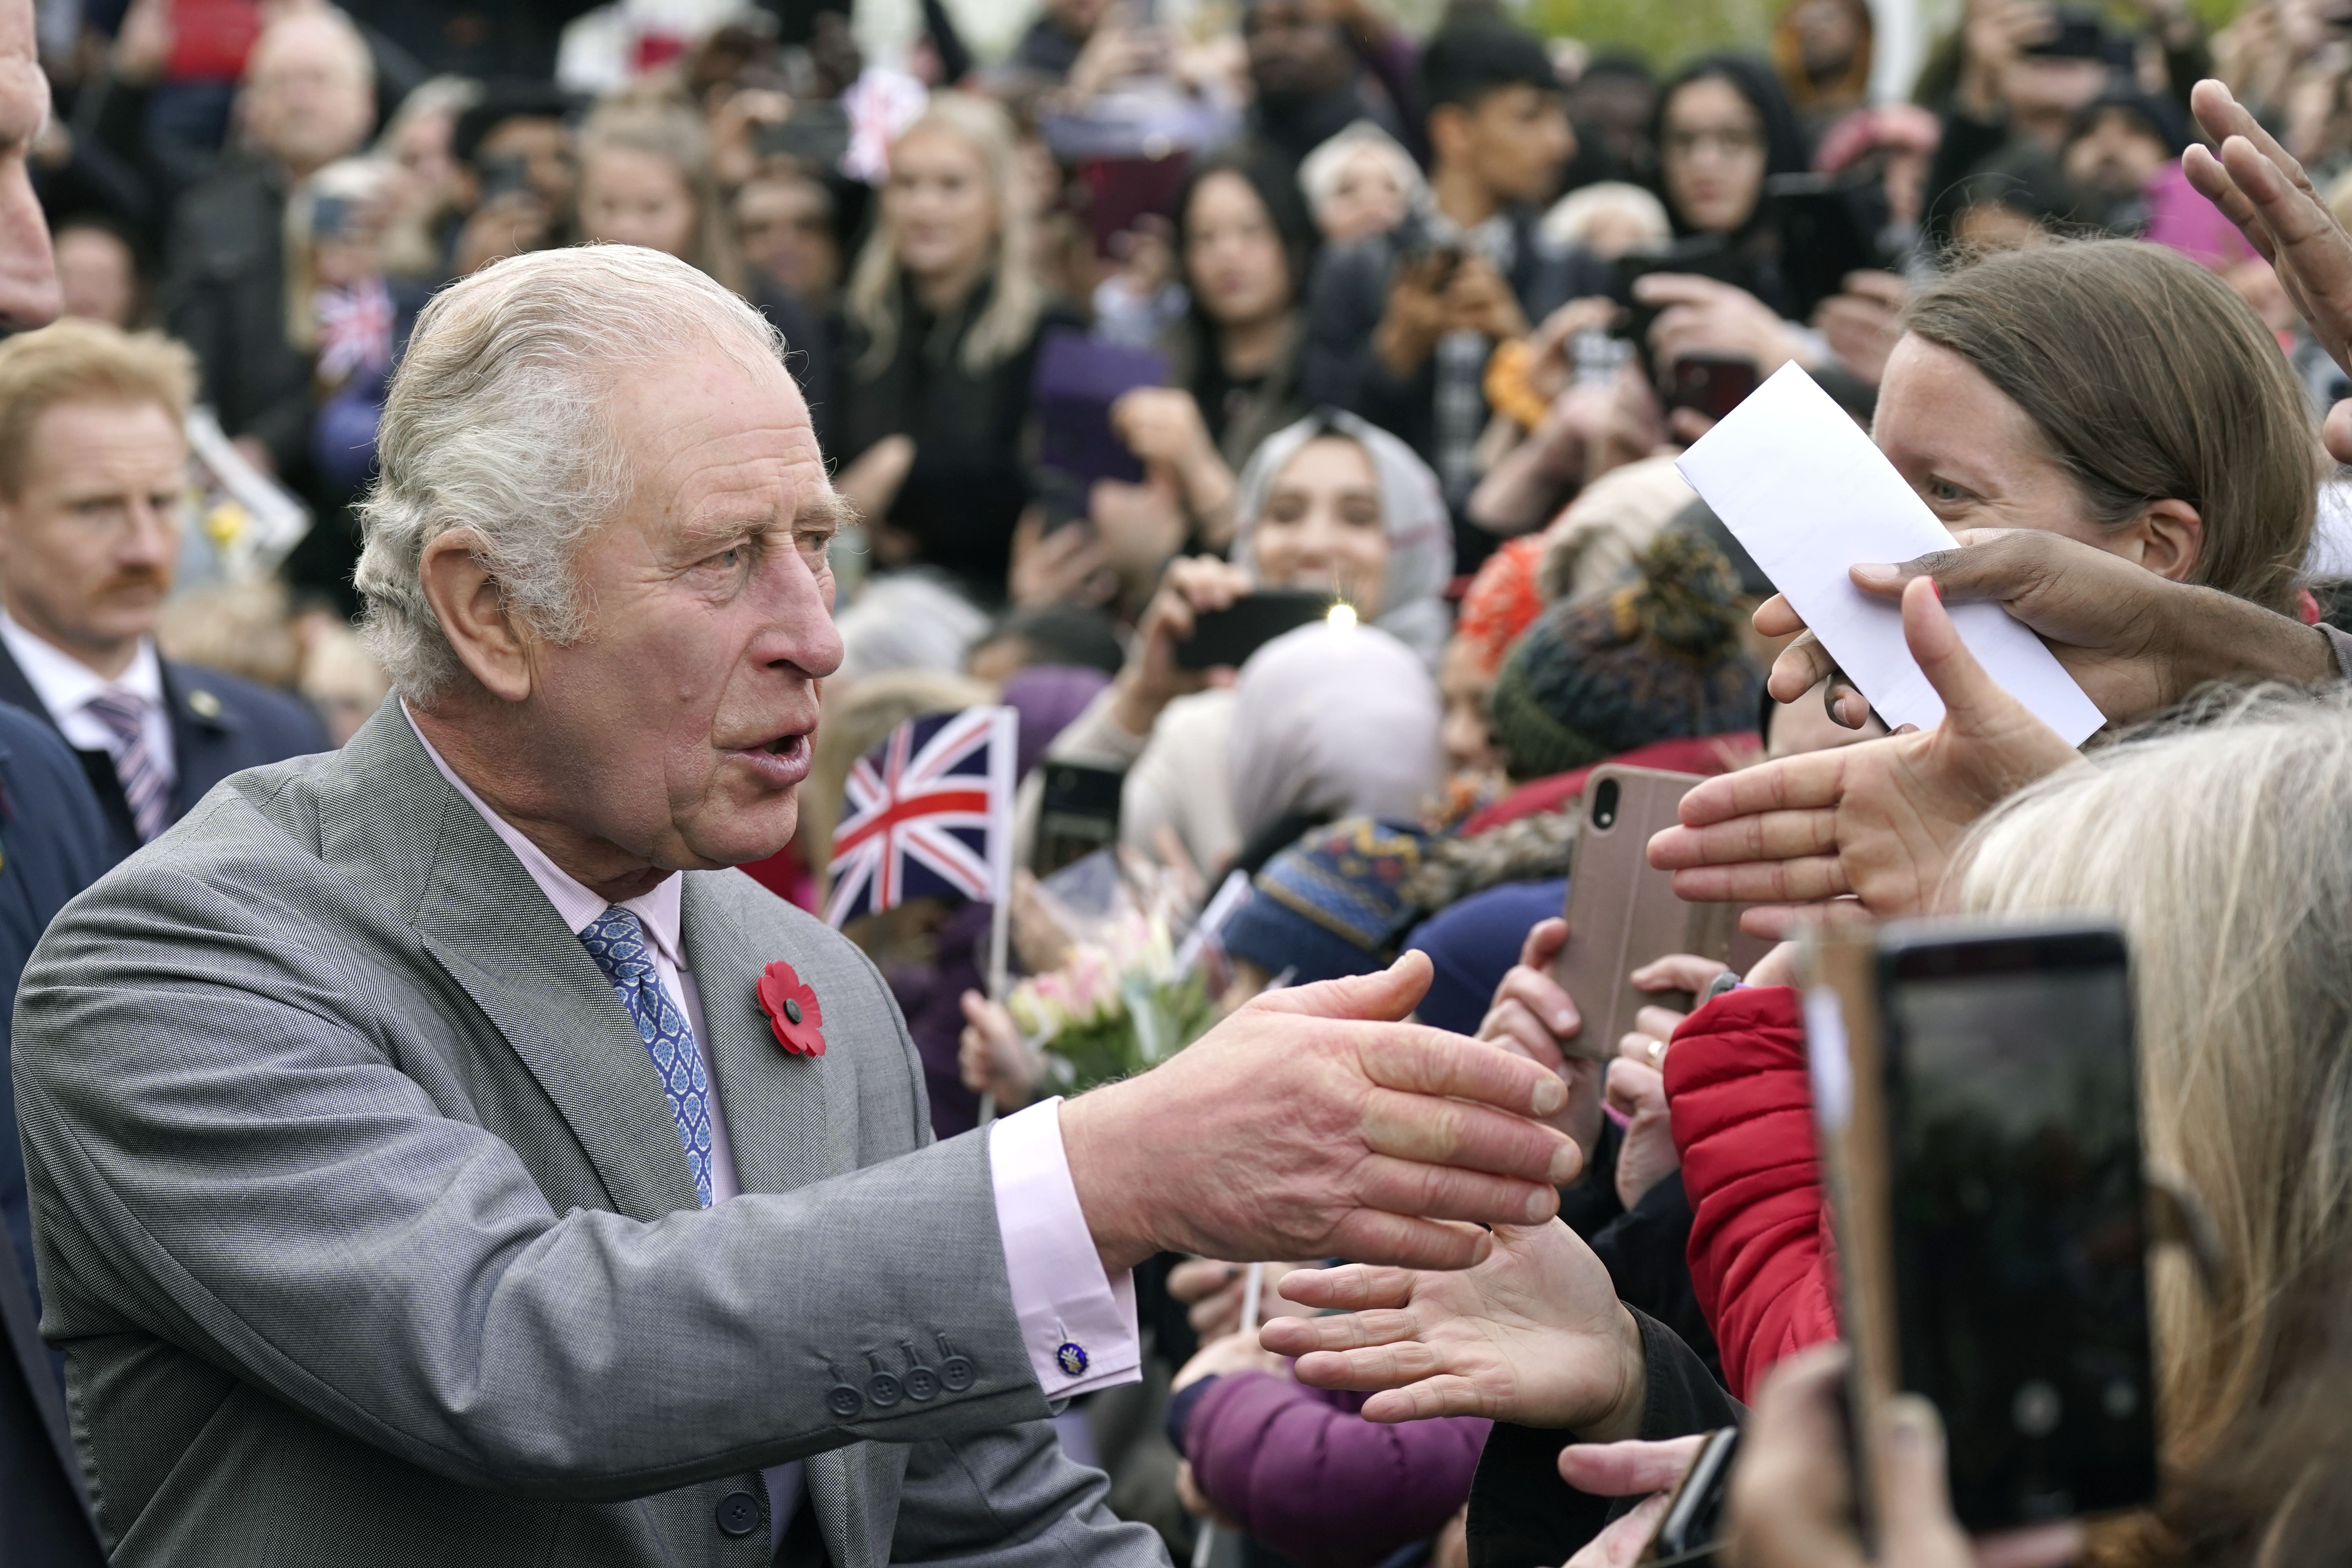 The King greeting members of the public (Danny Lawson/PA)